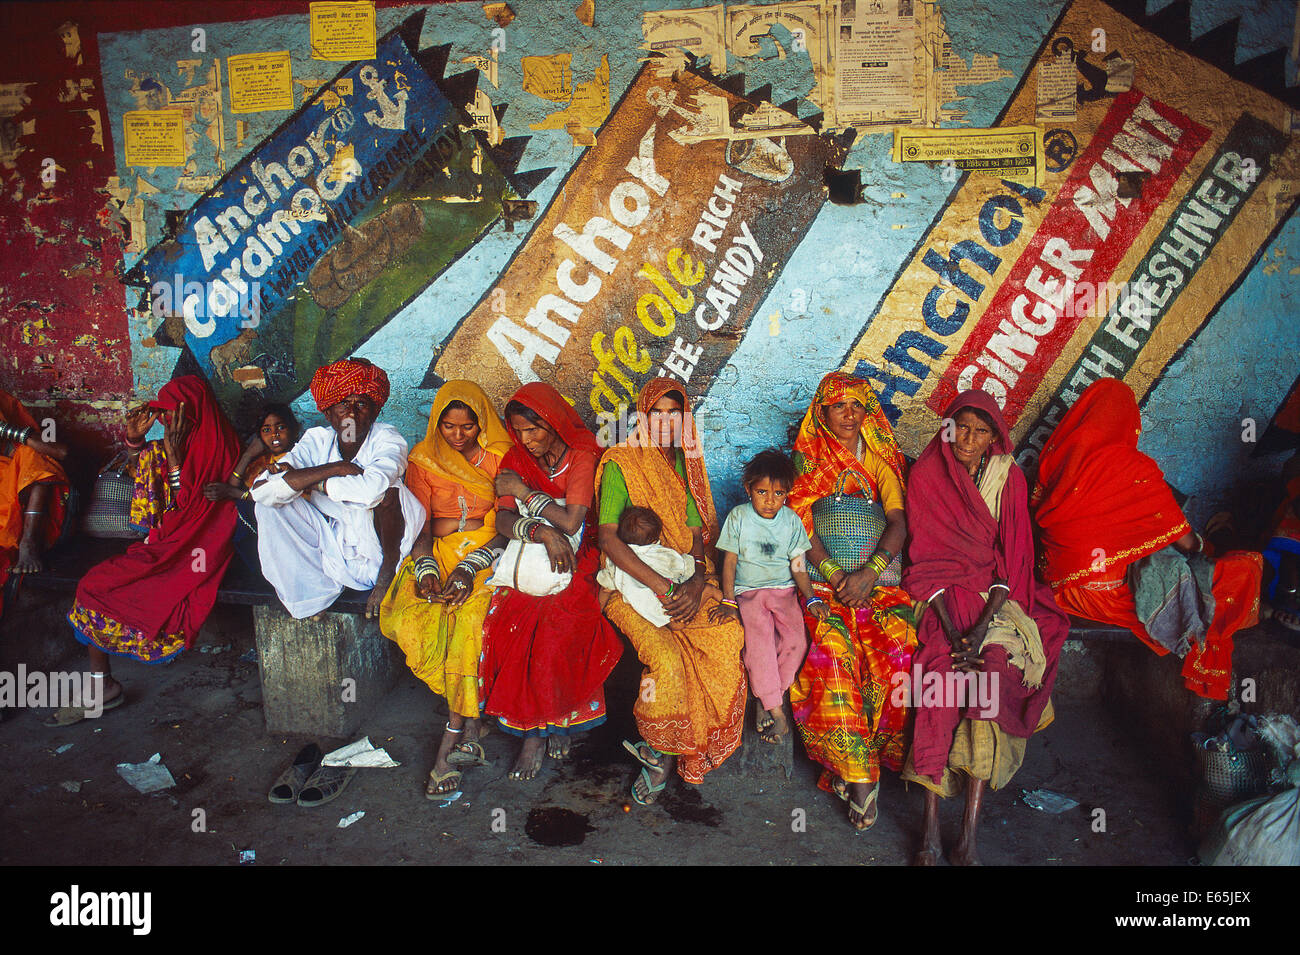 Tribespeople belonging to the Bhil community are waiting for a bus in a bus station. On the wall, there are advertisements. Stock Photo